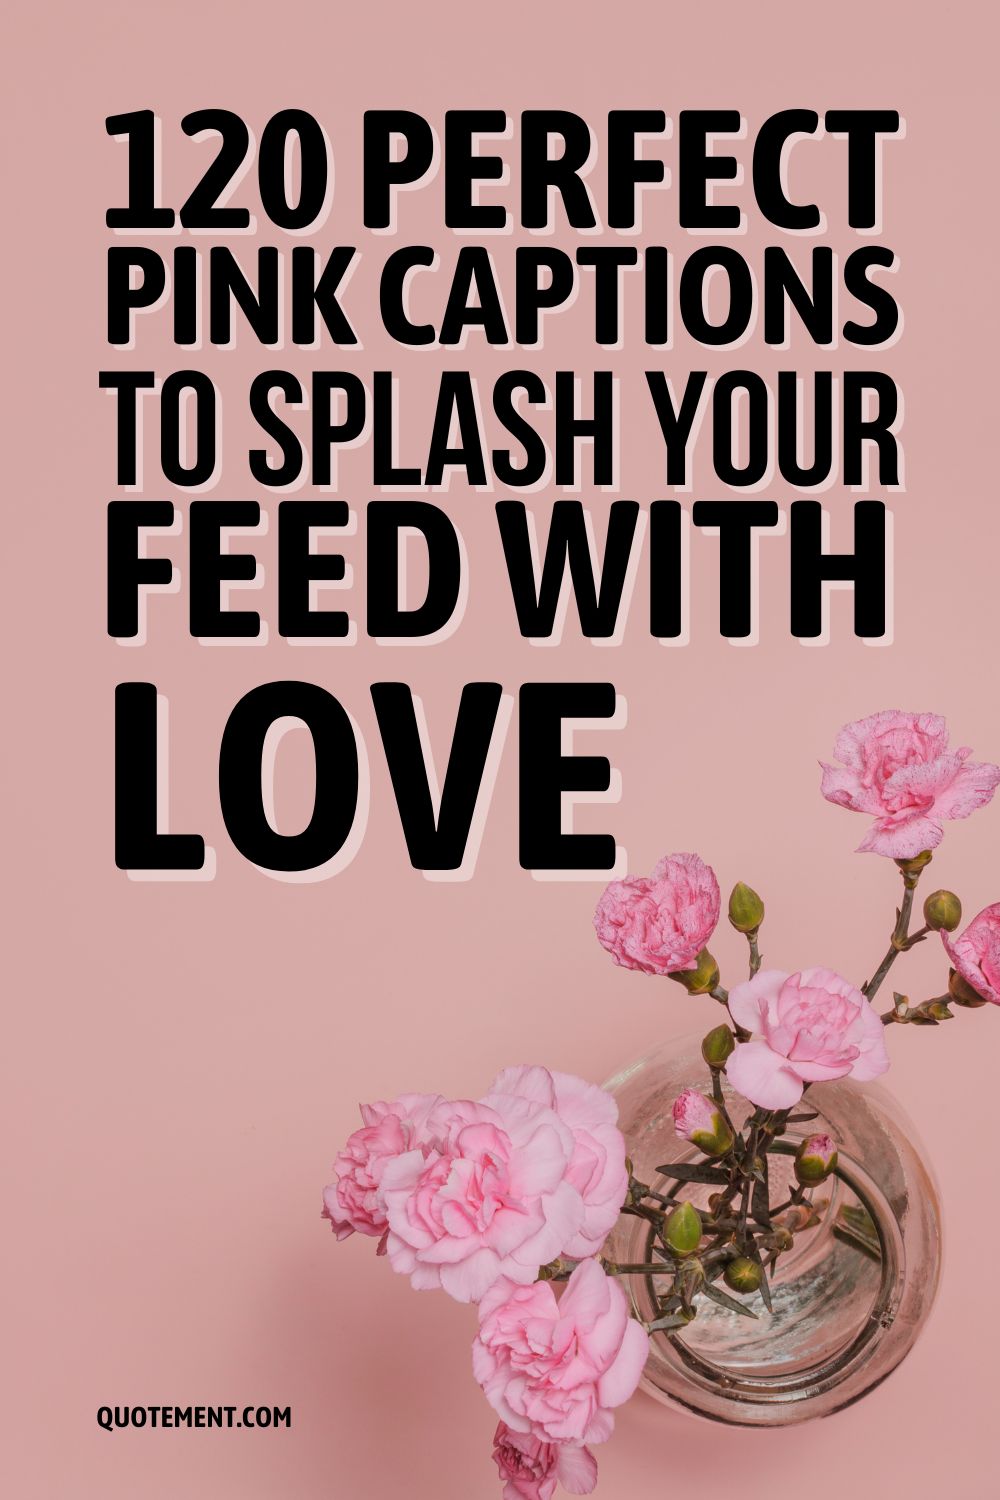 120 Perfect Pink Captions To Splash Your Feed With Love 